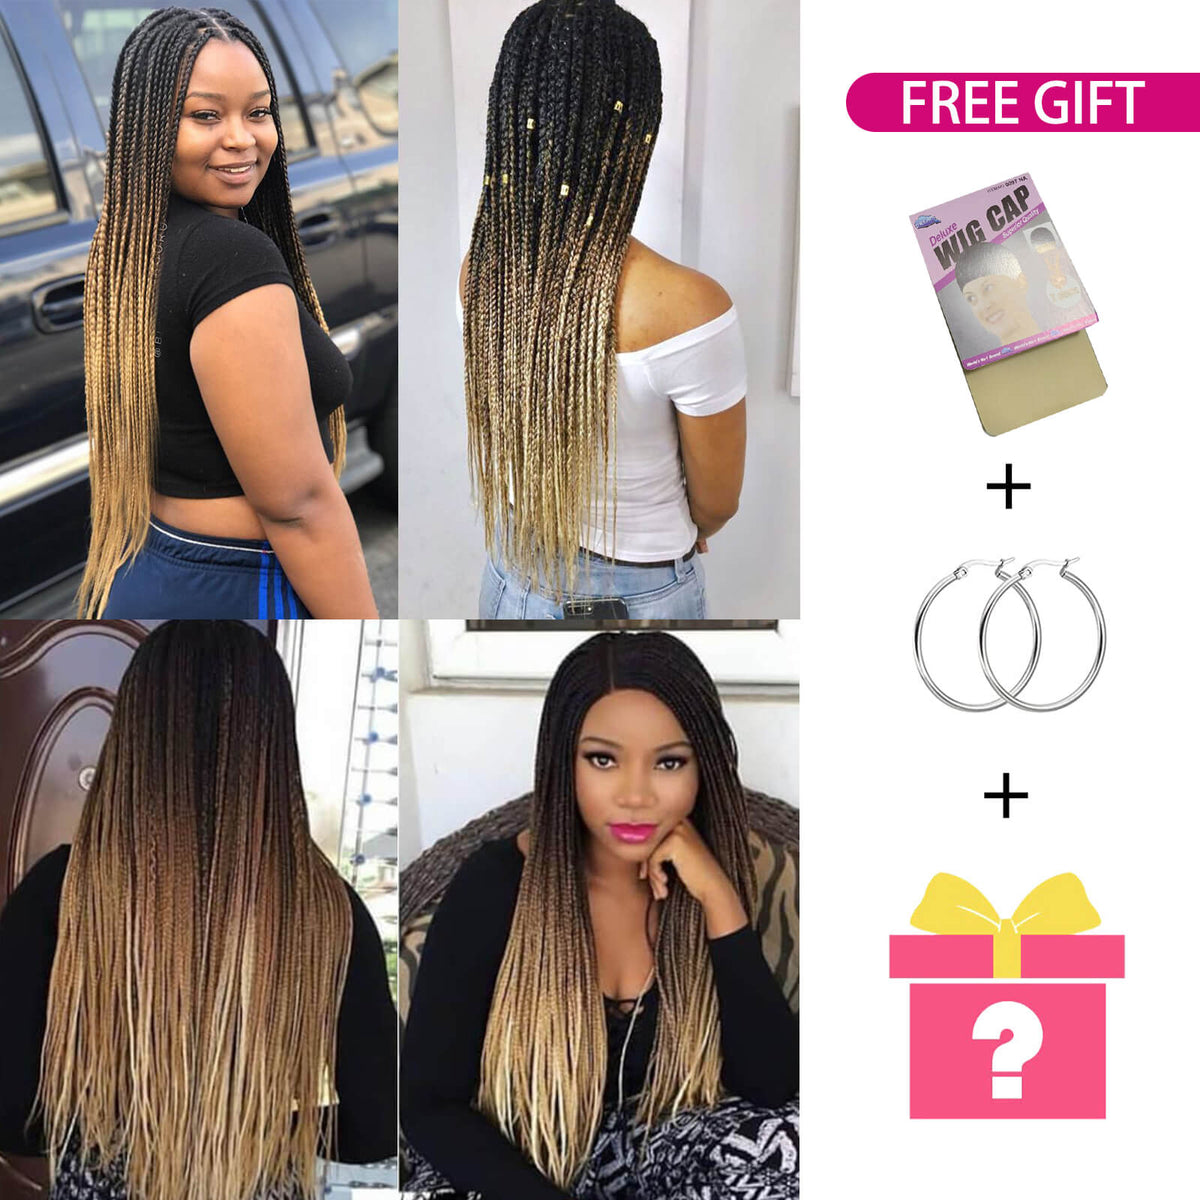 Box Braided Lace Front Wigs for Black Women Customer Show Shop Now Get Free Gifts!